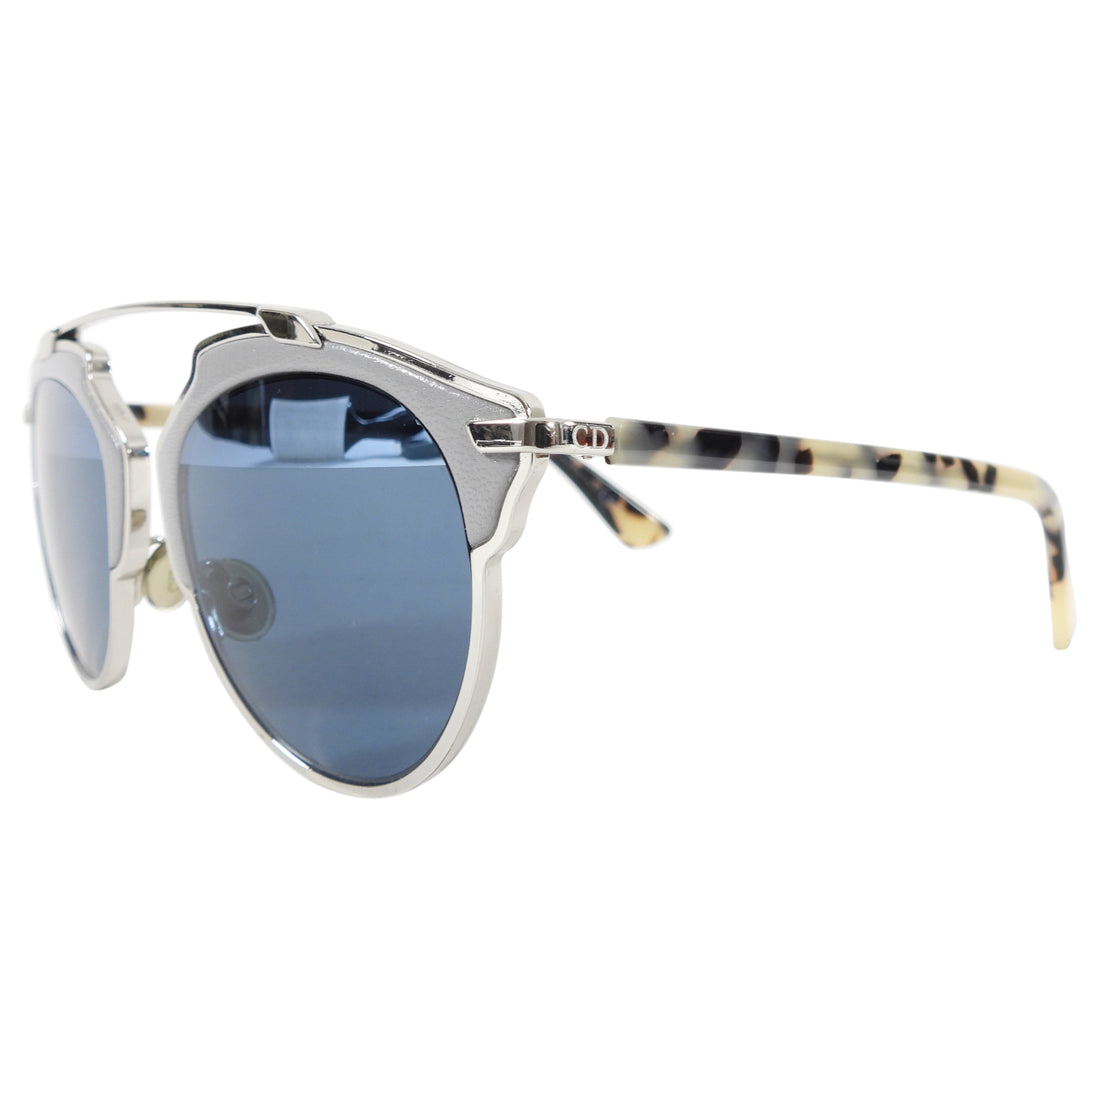 Dior So Real Grey and Silver Metal Sunglasses 